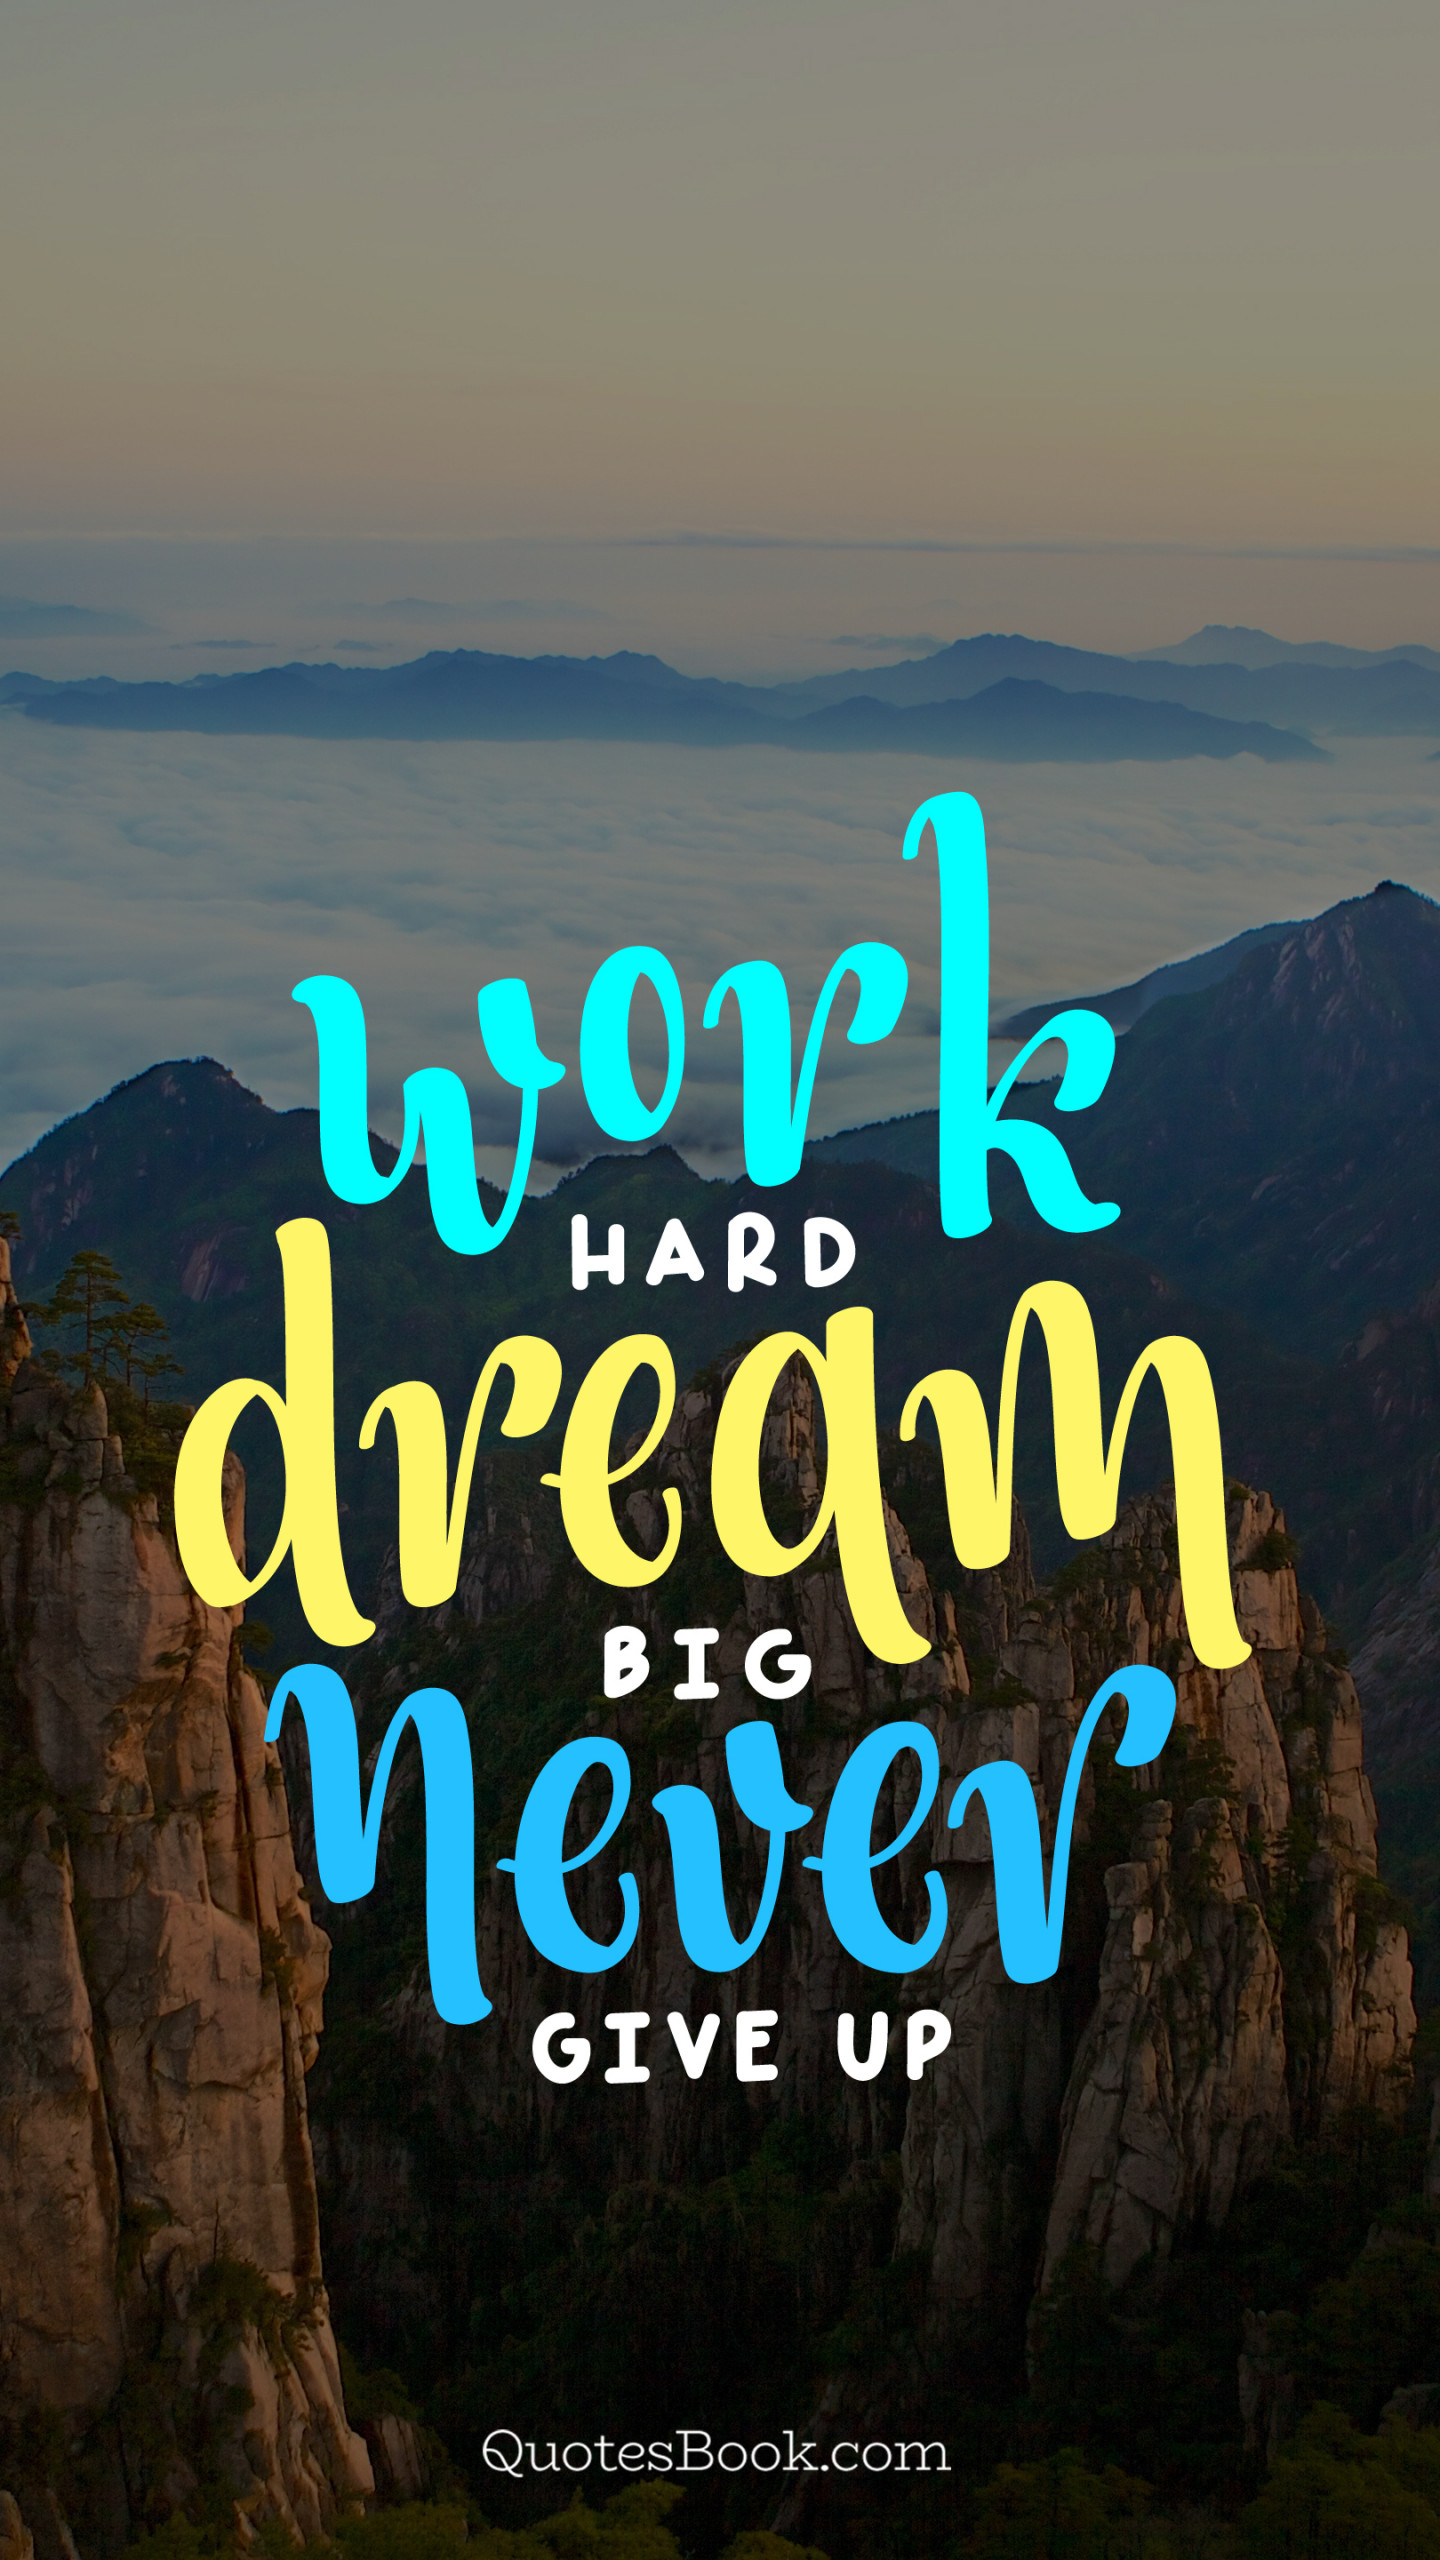 Work hard dream big never give up - Page 2 - QuotesBook